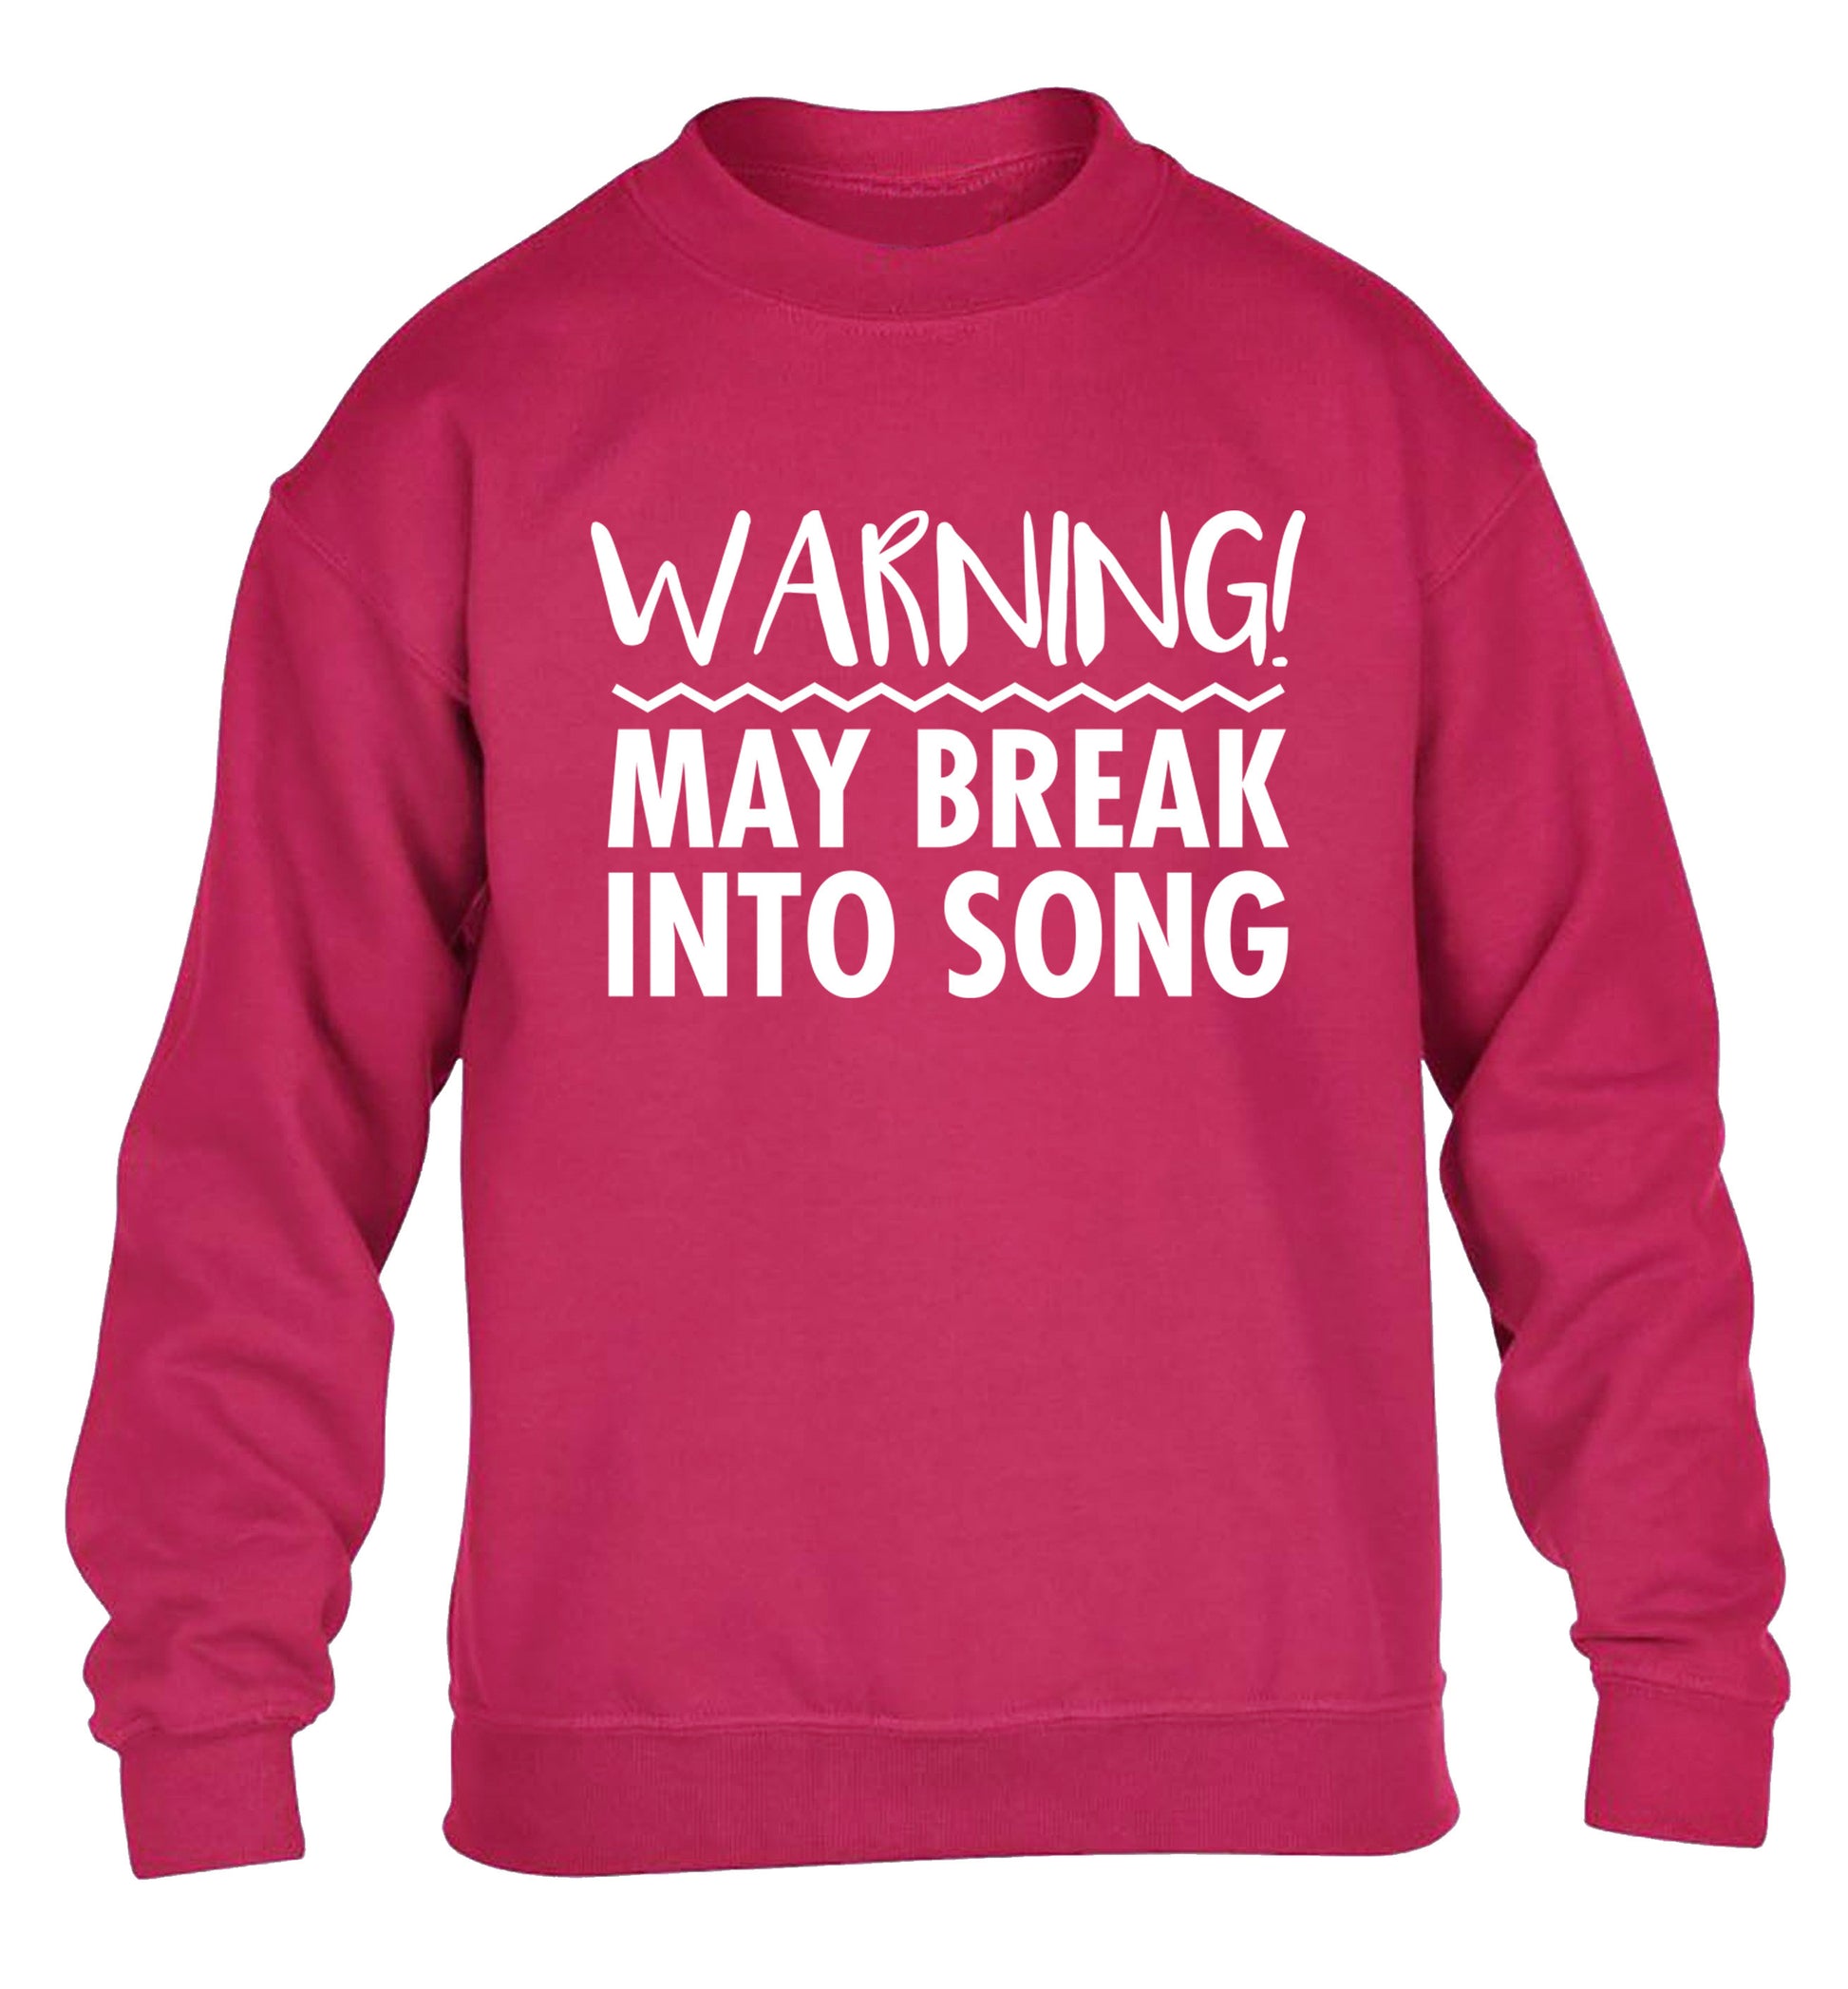 Warning may break into song children's pink sweater 12-14 Years